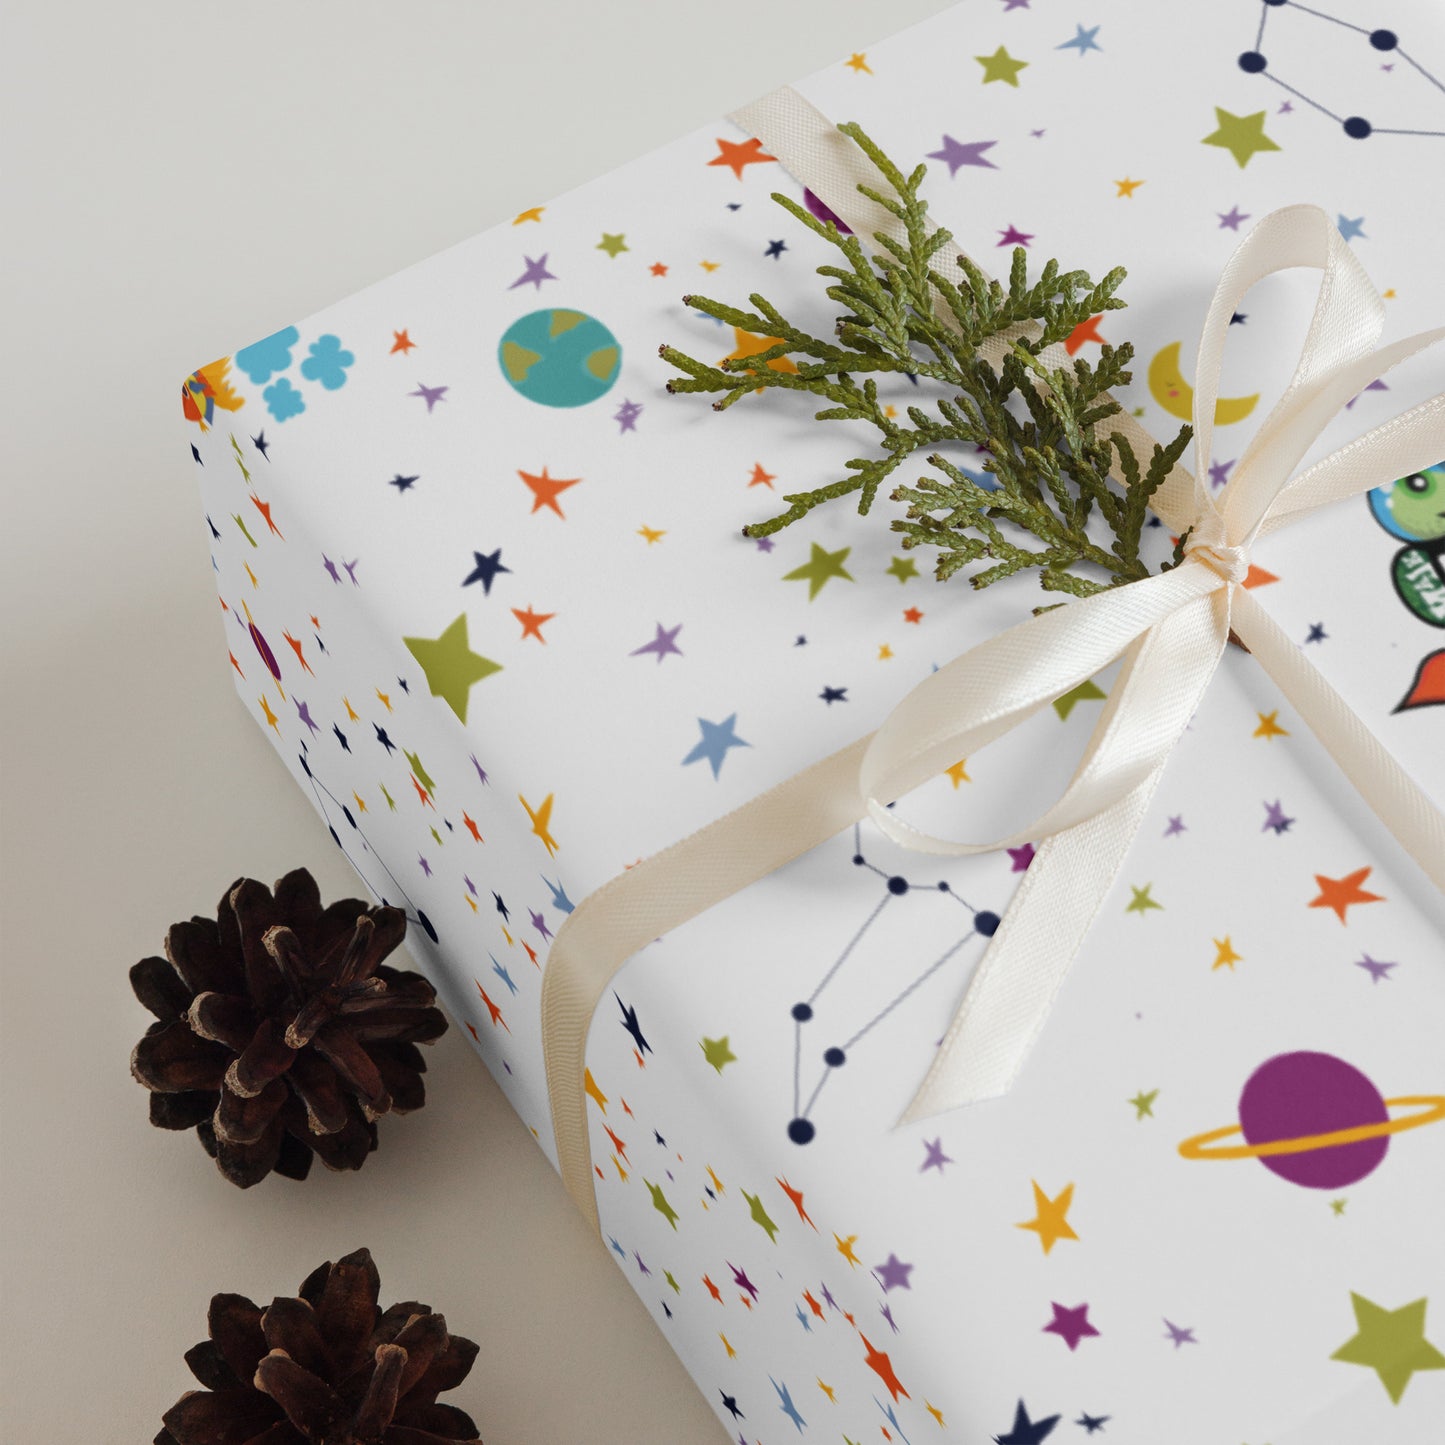 Designer Wrapping paper sheets- "Shell-abration"